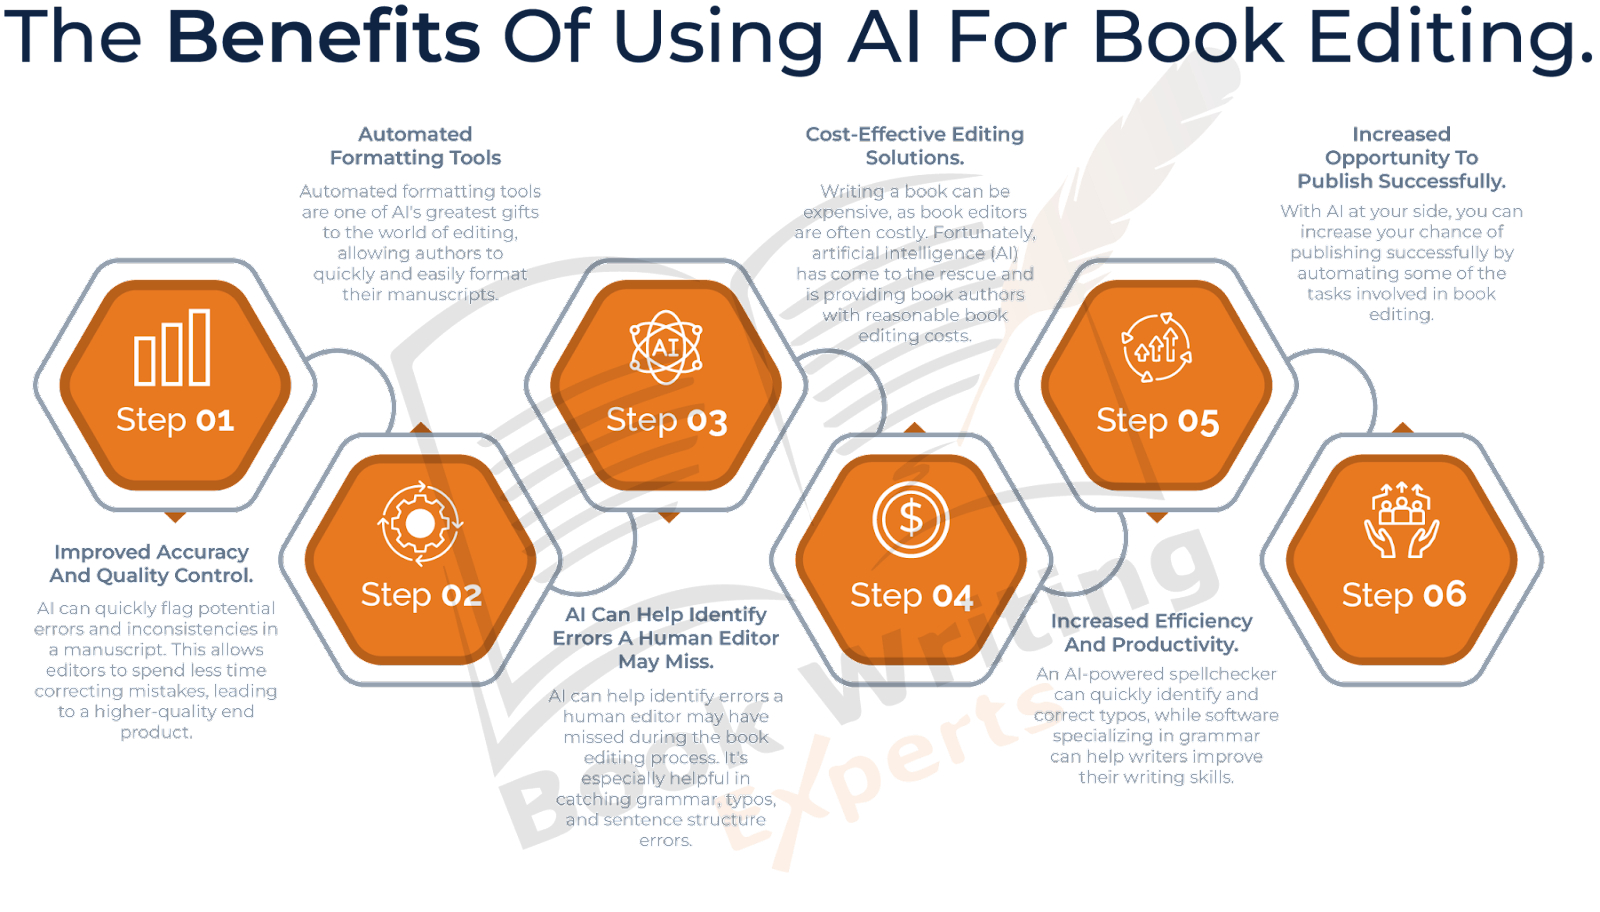  This Image Illustrates An Overview Of AI For Book Editing And Its Benefits. 